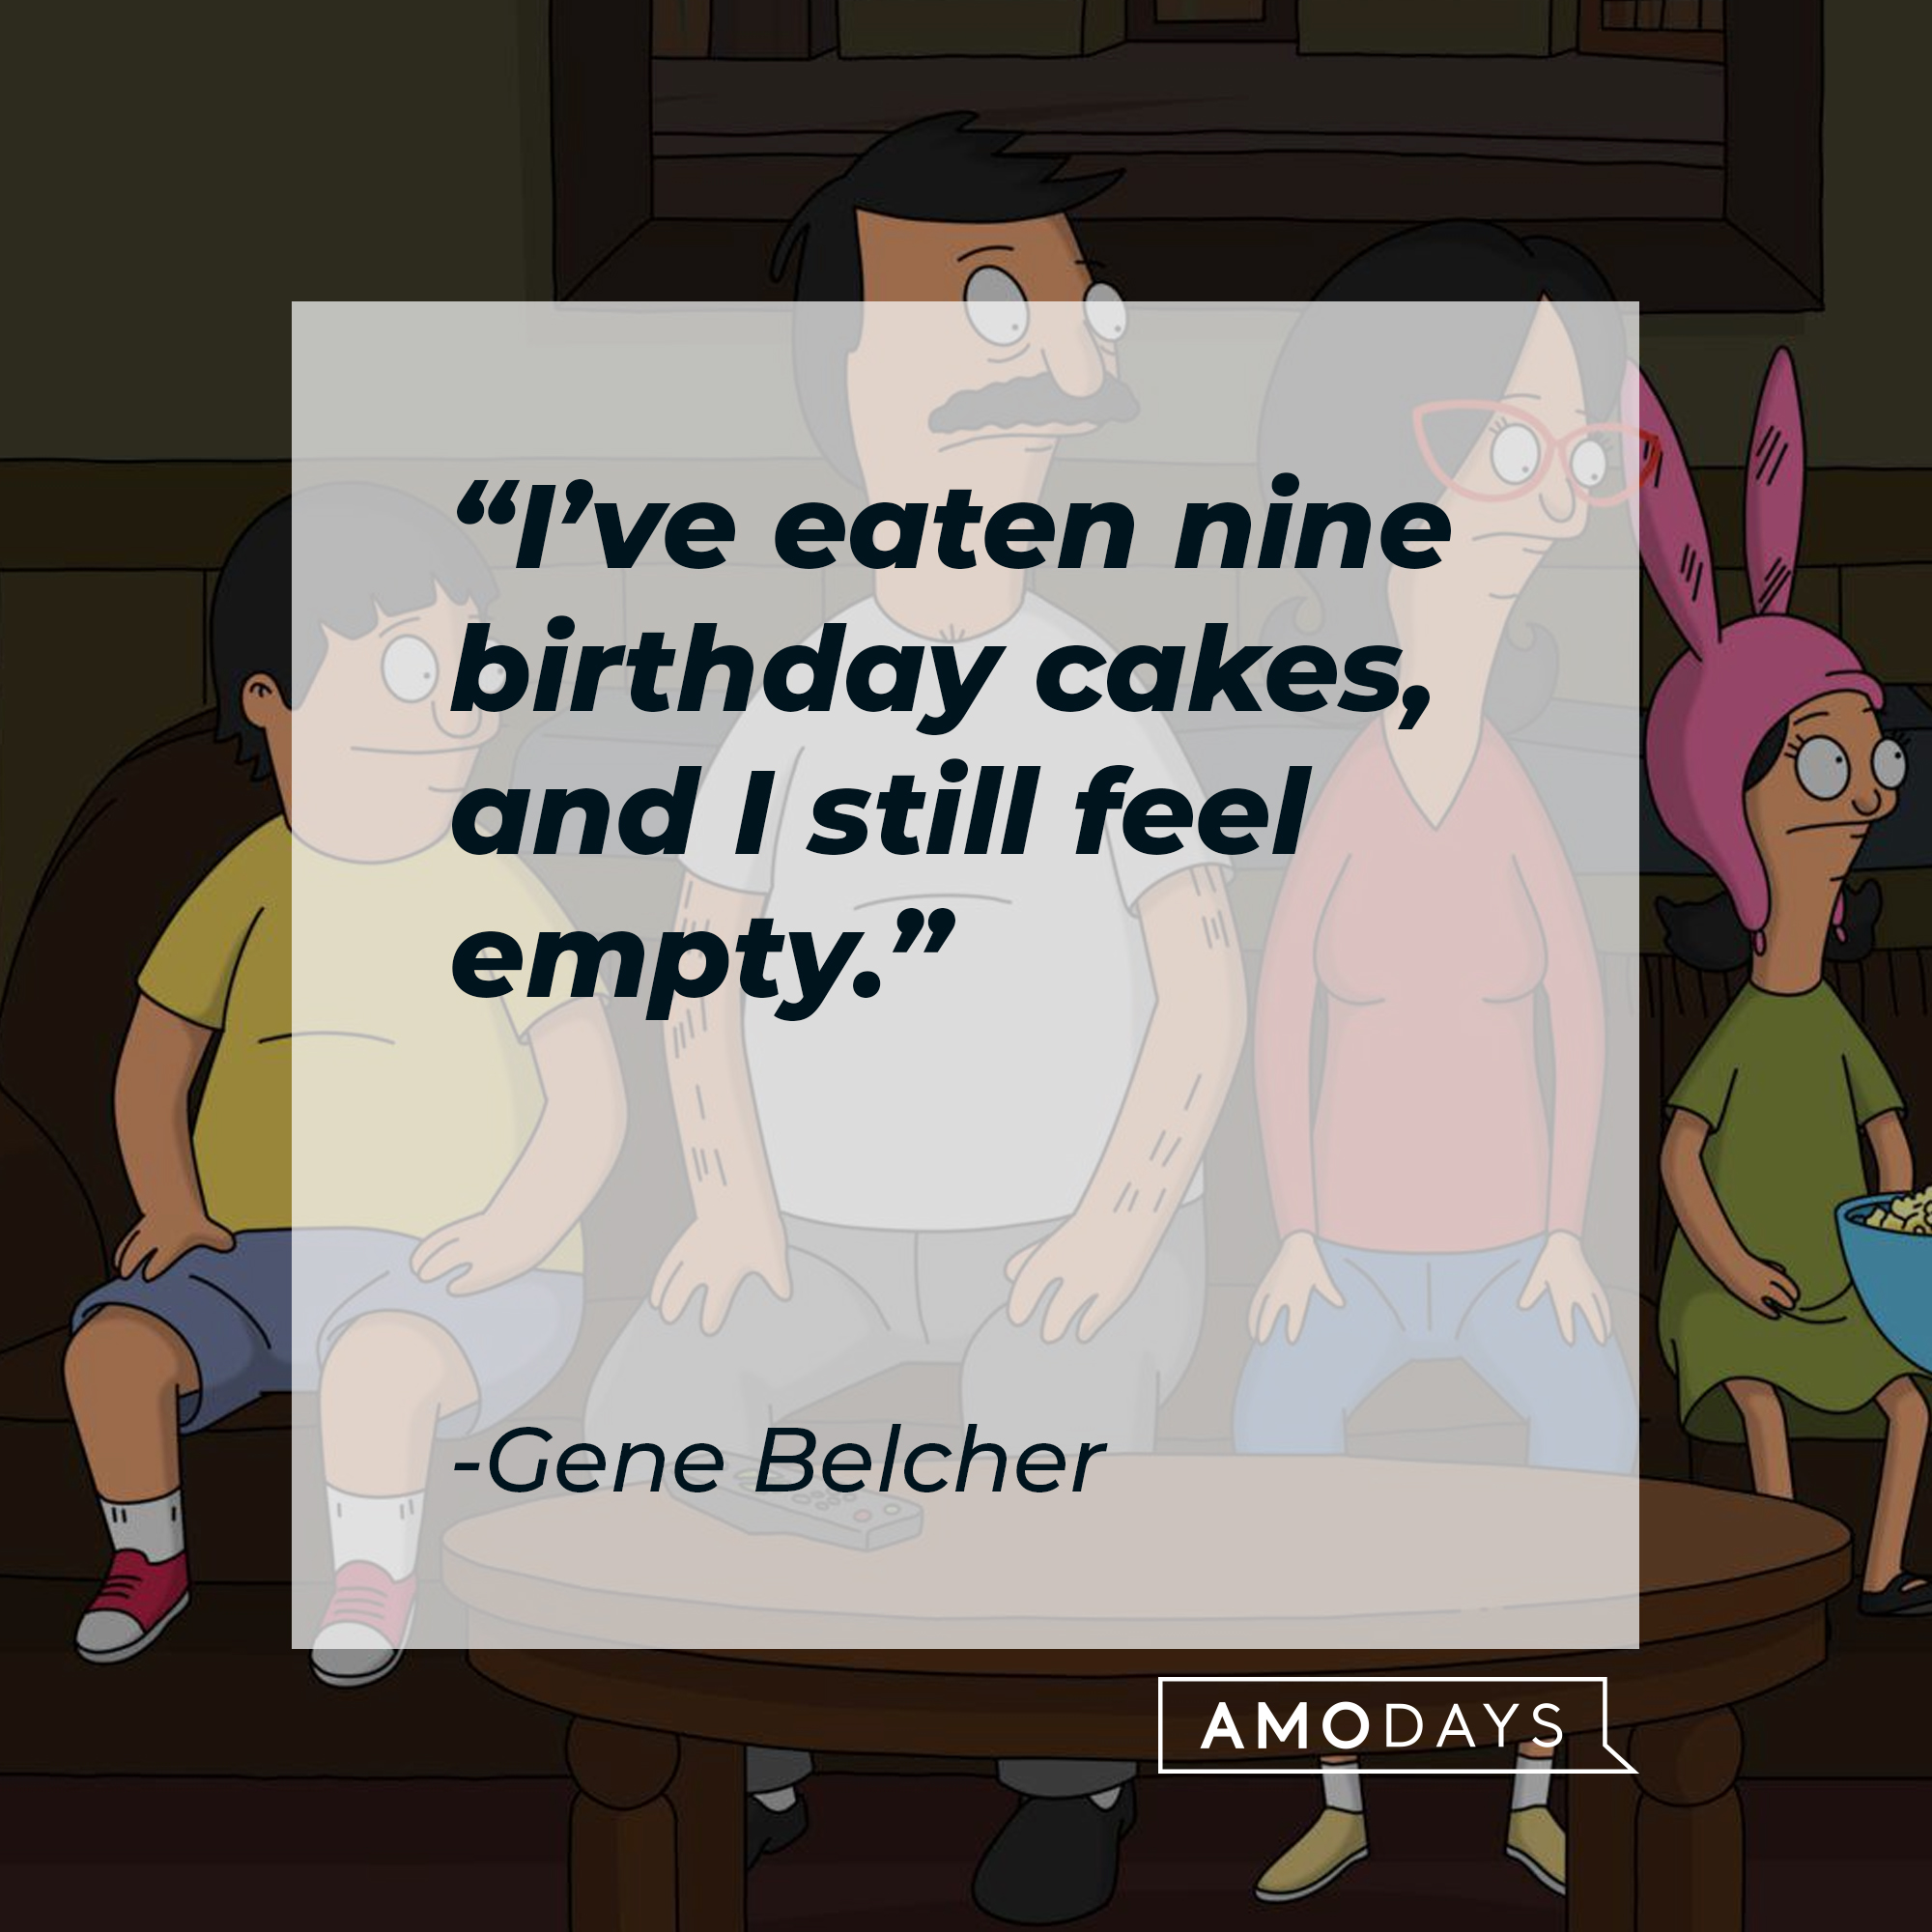 Characters from “Bob’s Burger’s,” including Gene Belcher, with his quote: “I’ve eaten nine birthday cakes, and I still feel empty." | Source: Facebook.com/BobsBurgers